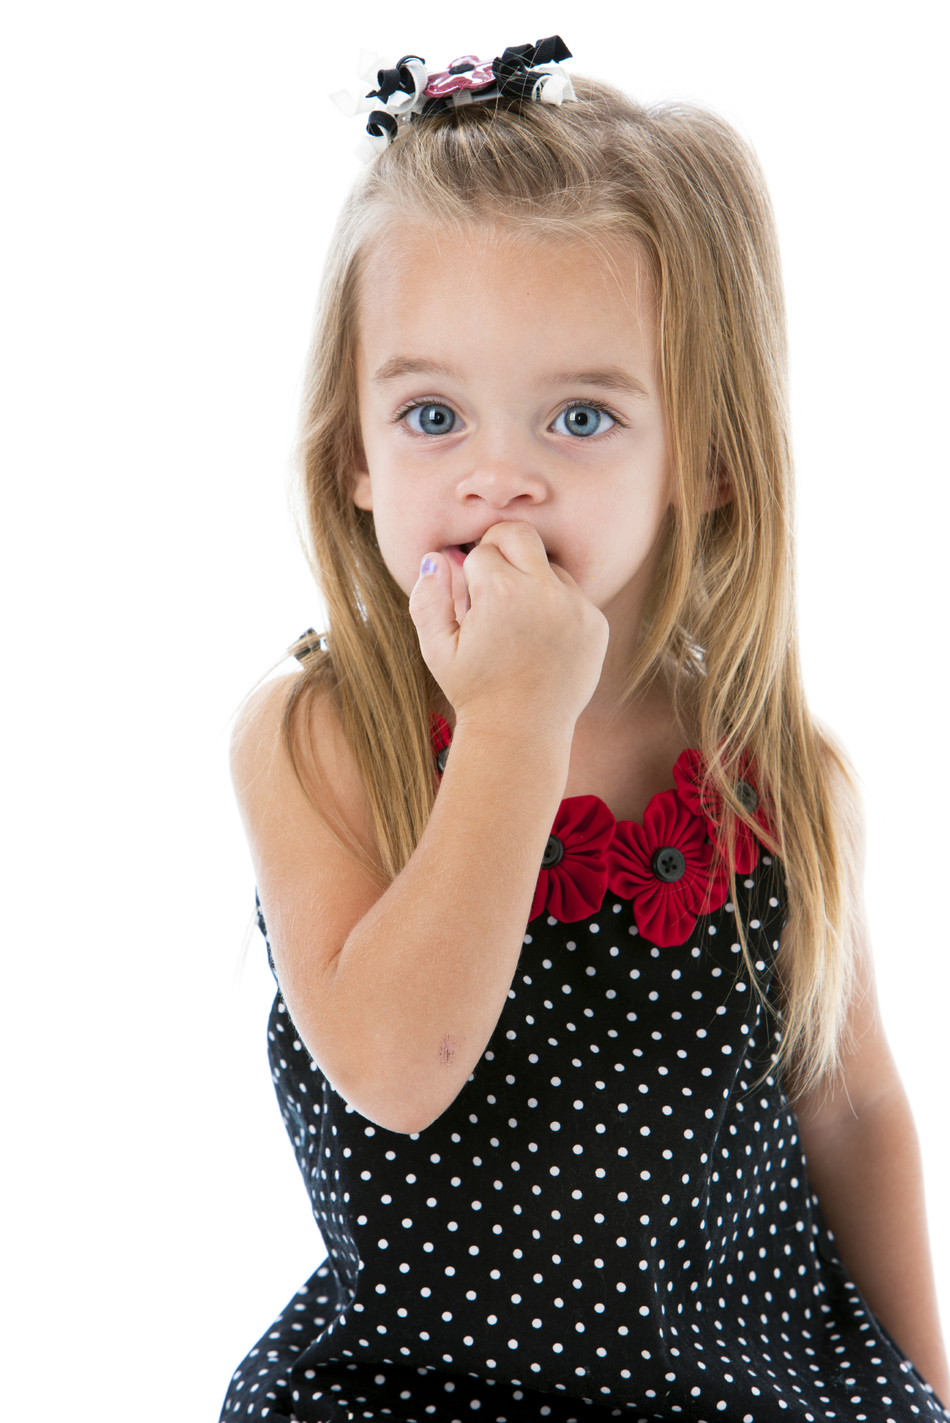 Why Do Kids Bite Their Nails? 4-Must Try Ways to Stop Nail Biting! |  Parenting Tips and more | OZKIZ GLOBAL OZKIZ BLOG blog